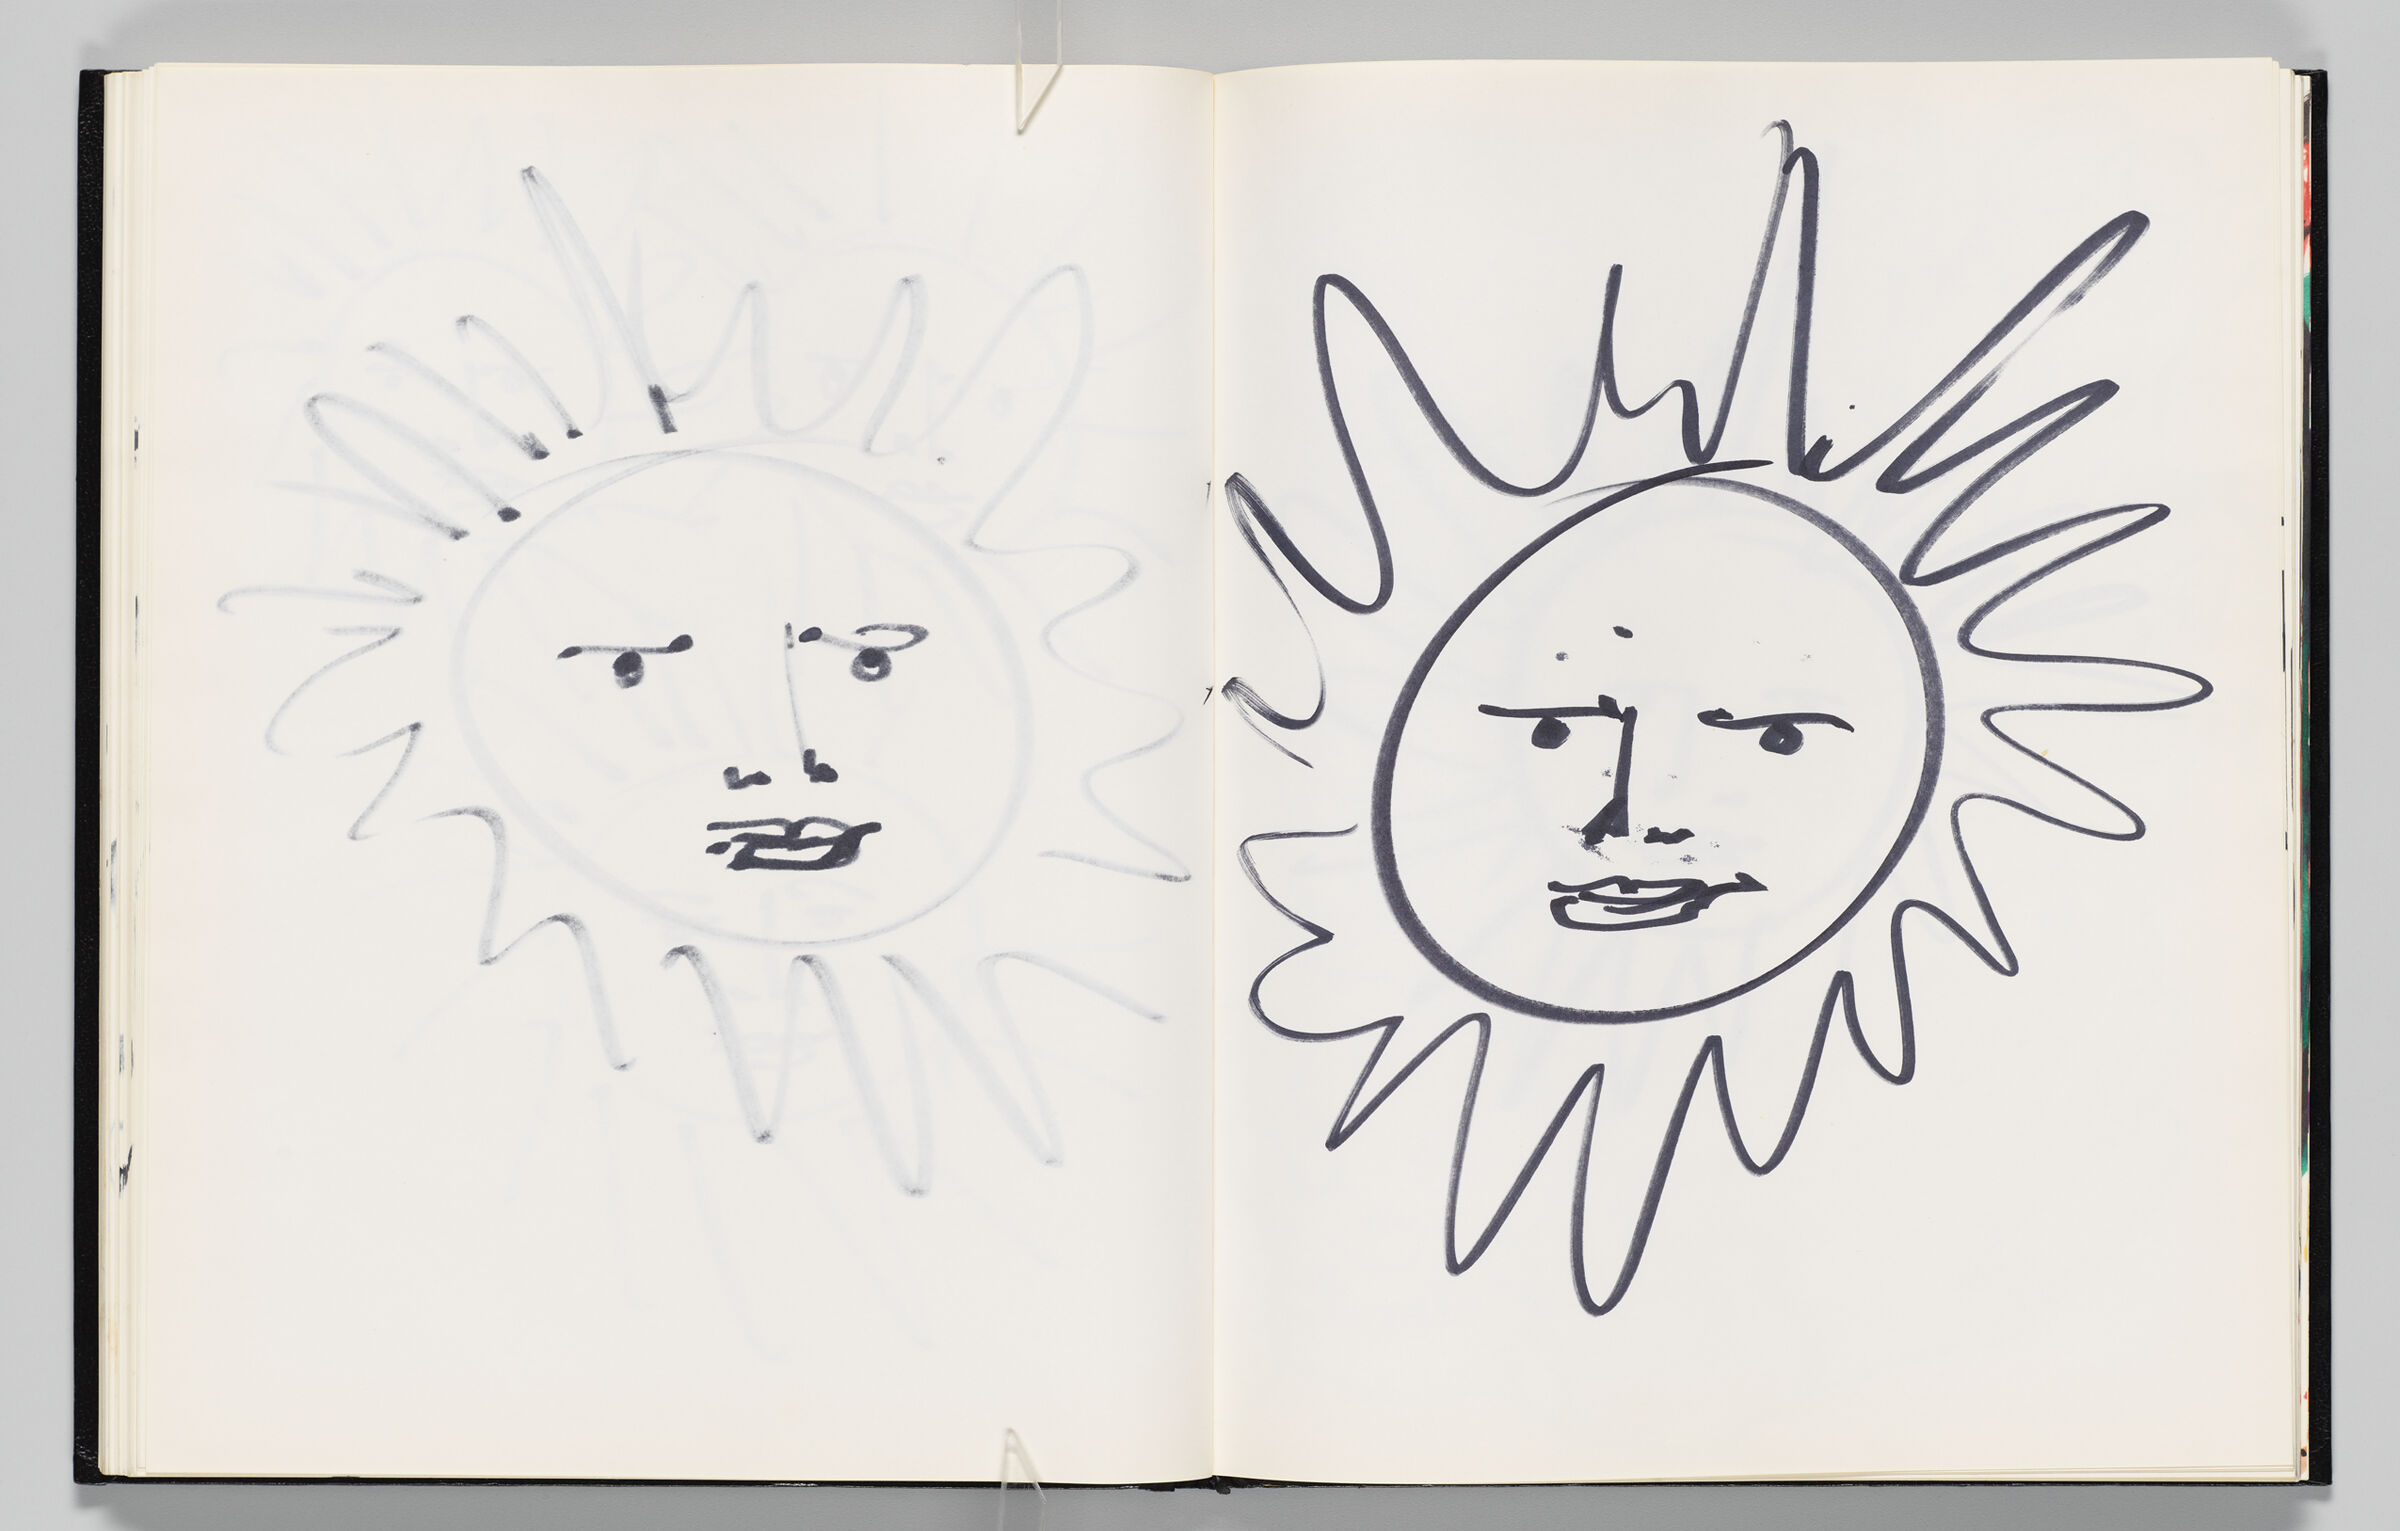 Untitled (Bleed-Through Of Previous Page, Left Page); Untitled (Suns/Phaeton, Right Page)